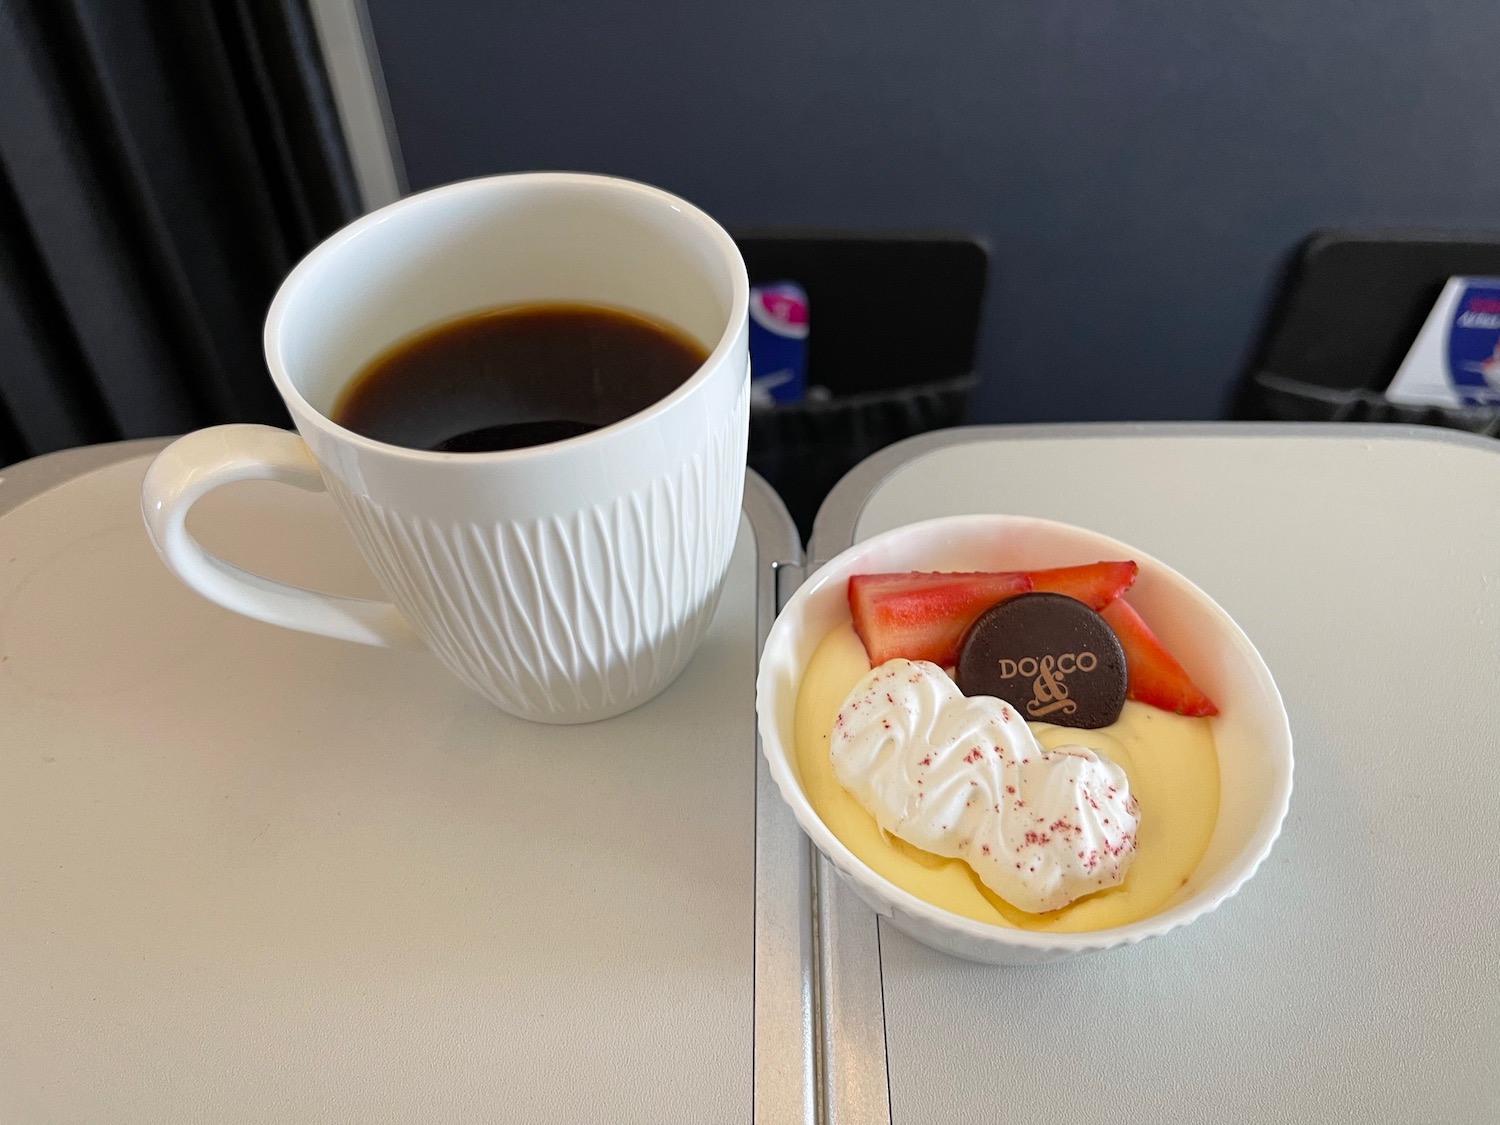 a cup of coffee next to a dessert